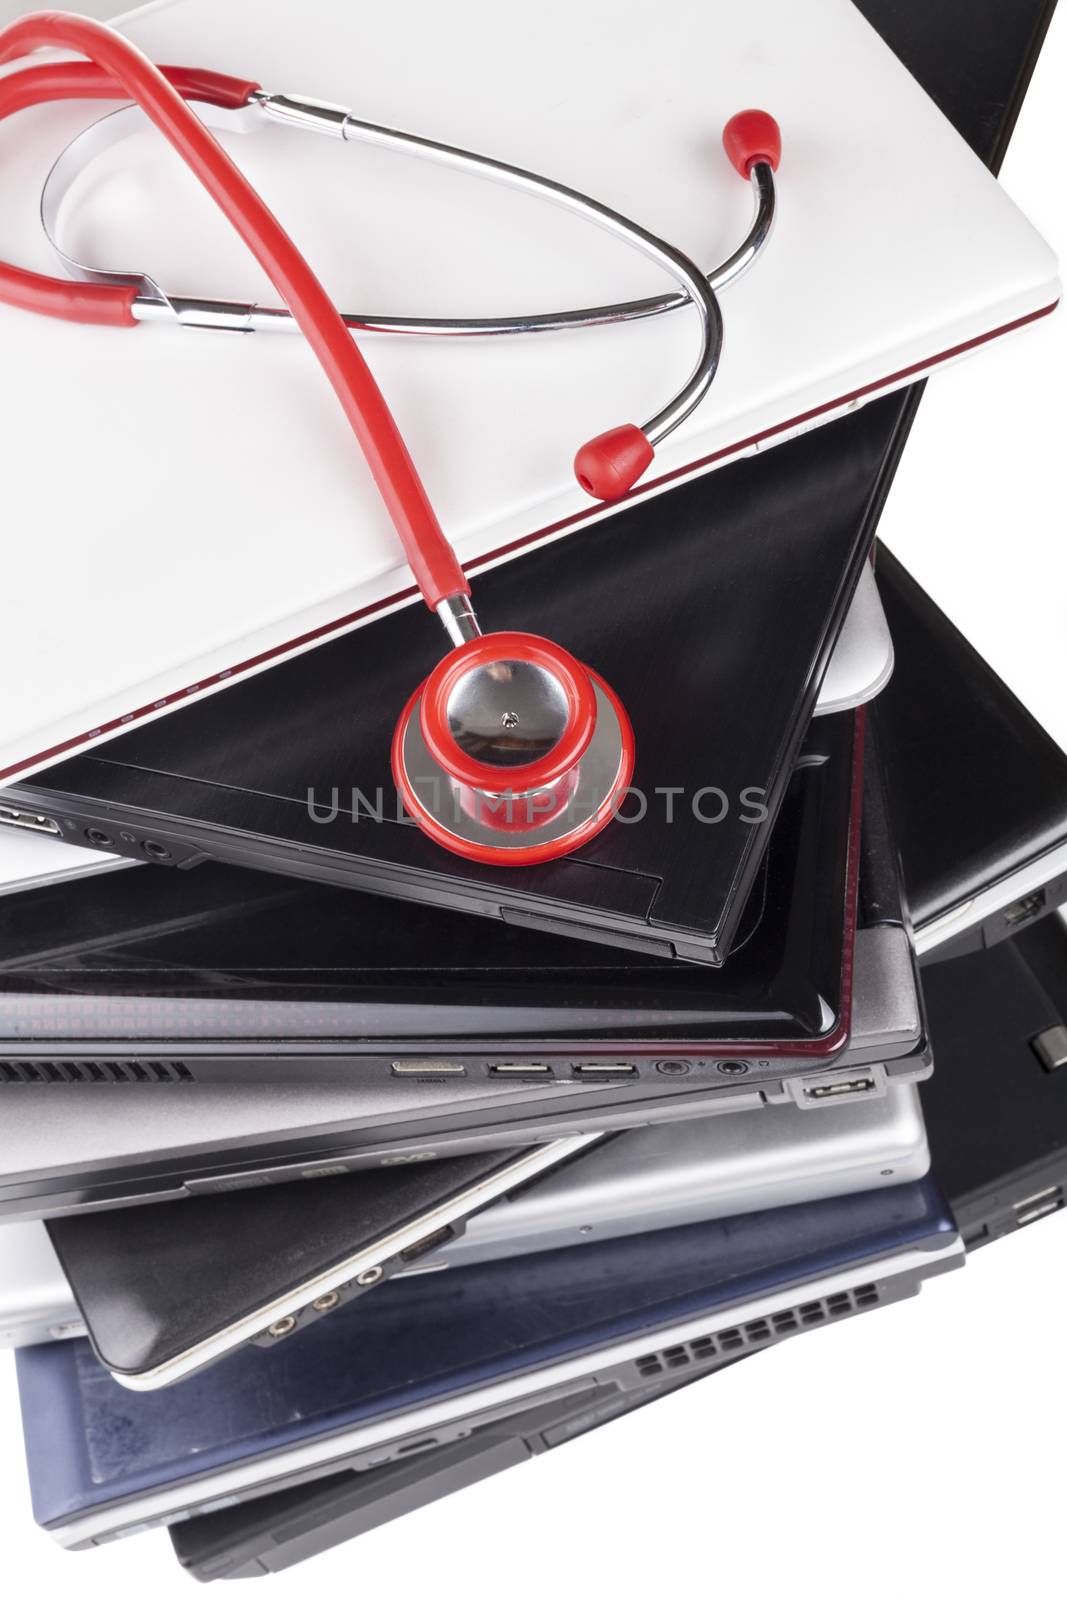 Red Stethoscope on pile of old laptops close-up upper view on white background